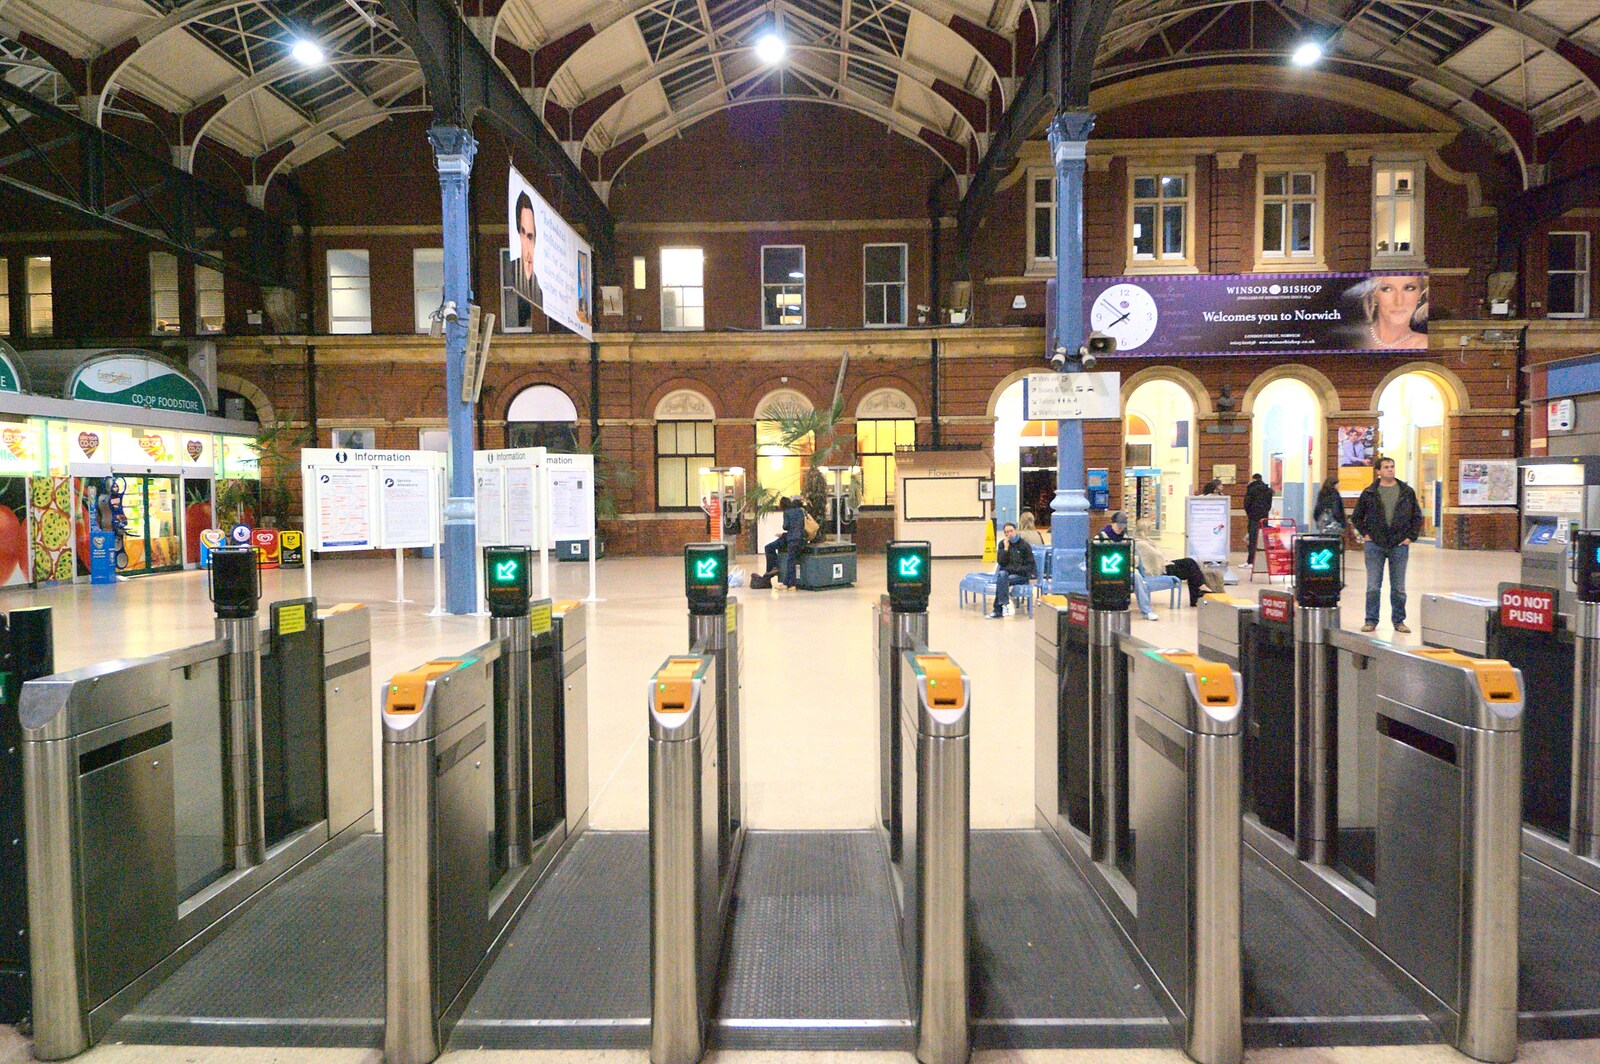 Empty ticket barriers from The CAMRA Norwich Beer Festival, St. Andrew's Hall, Norwich - 26th October 2011